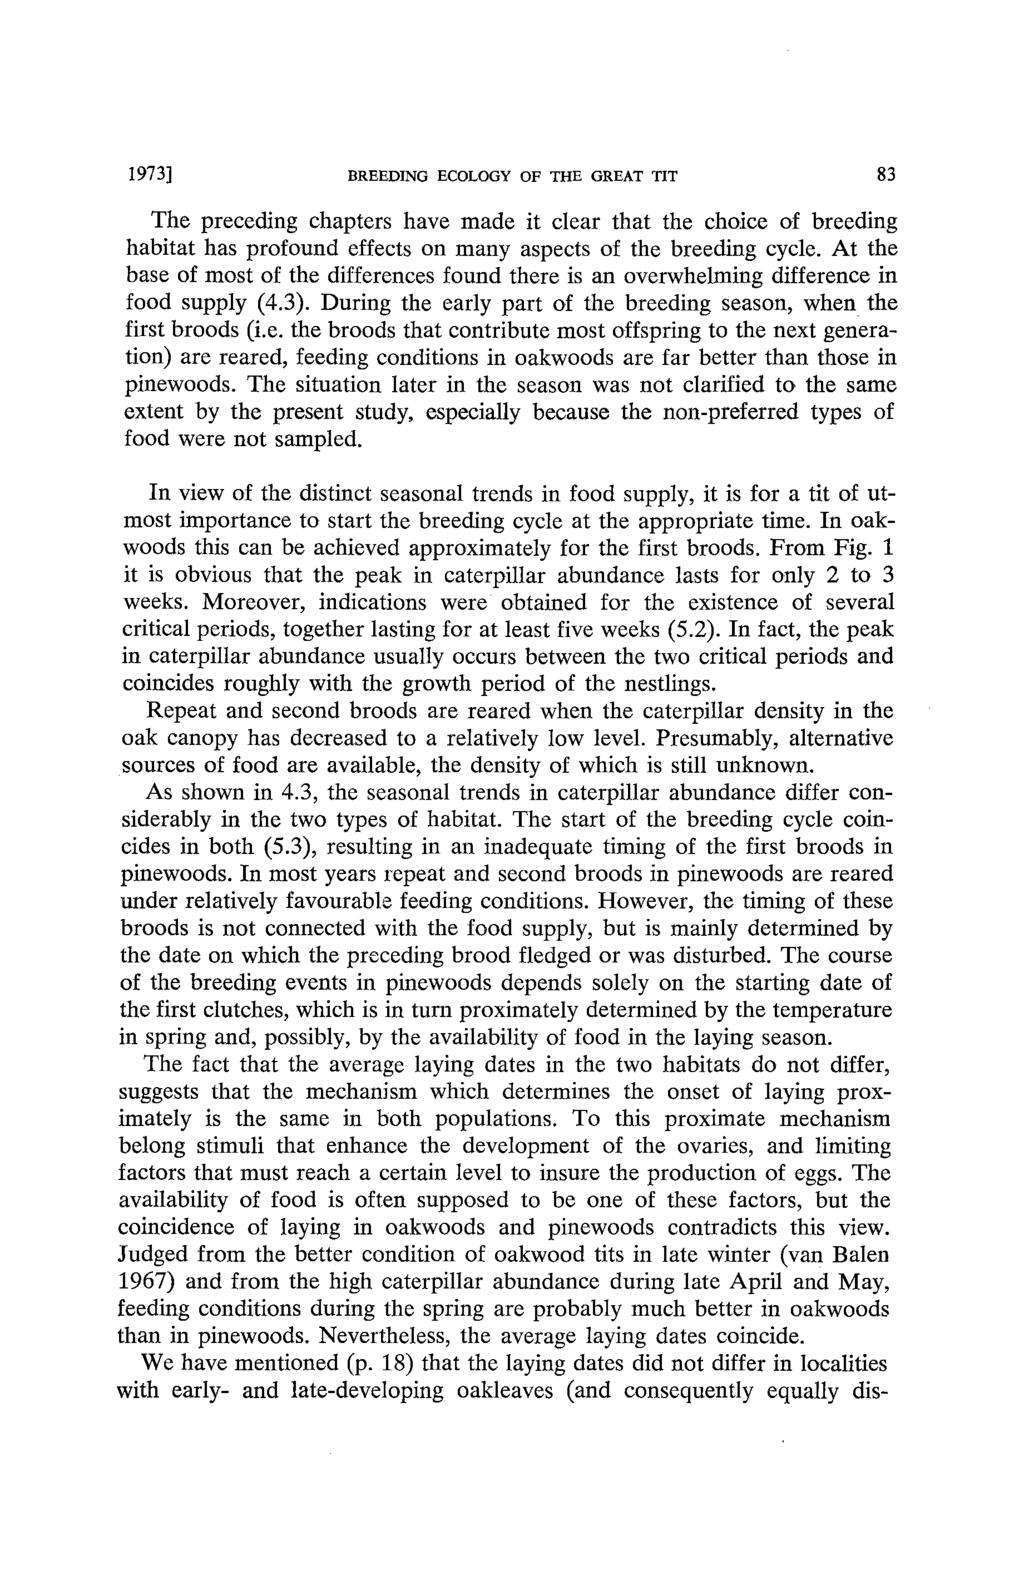 1973] BREEDING ECOLOGY OF THE GREAT TIT 83 The preceding chapters have made it clear that the choice of breeding habitat has profound effects on many aspects of the breeding cycle.